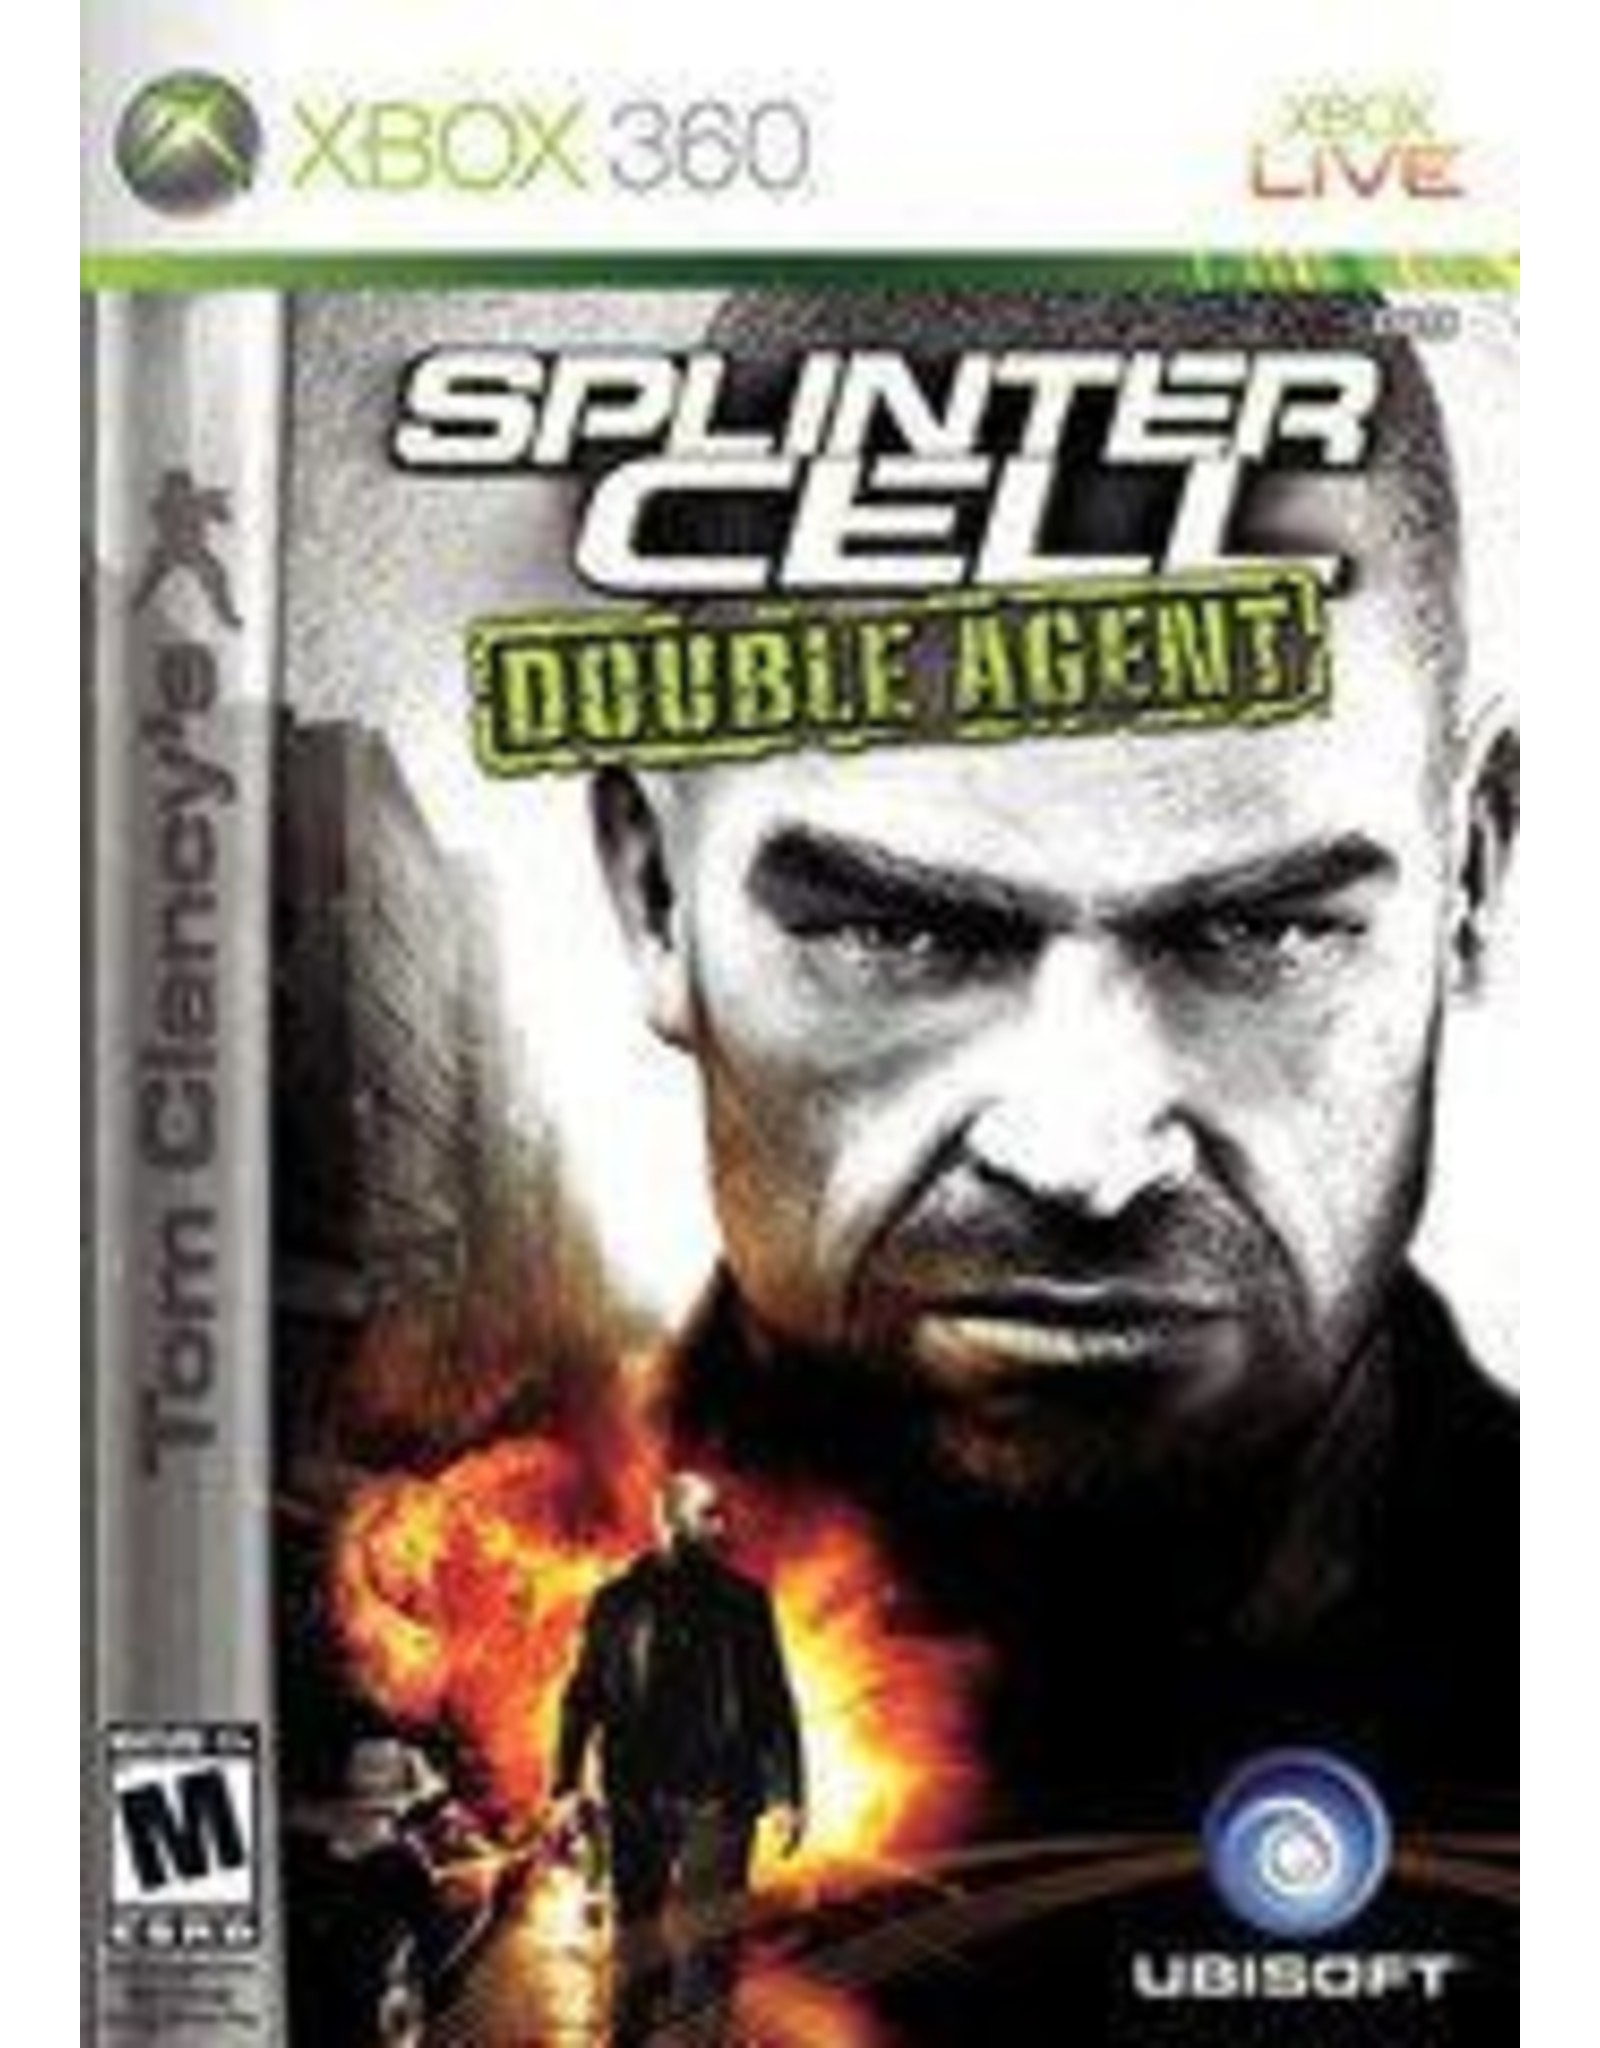 Xbox 360 Splinter Cell Double Agent (Used)